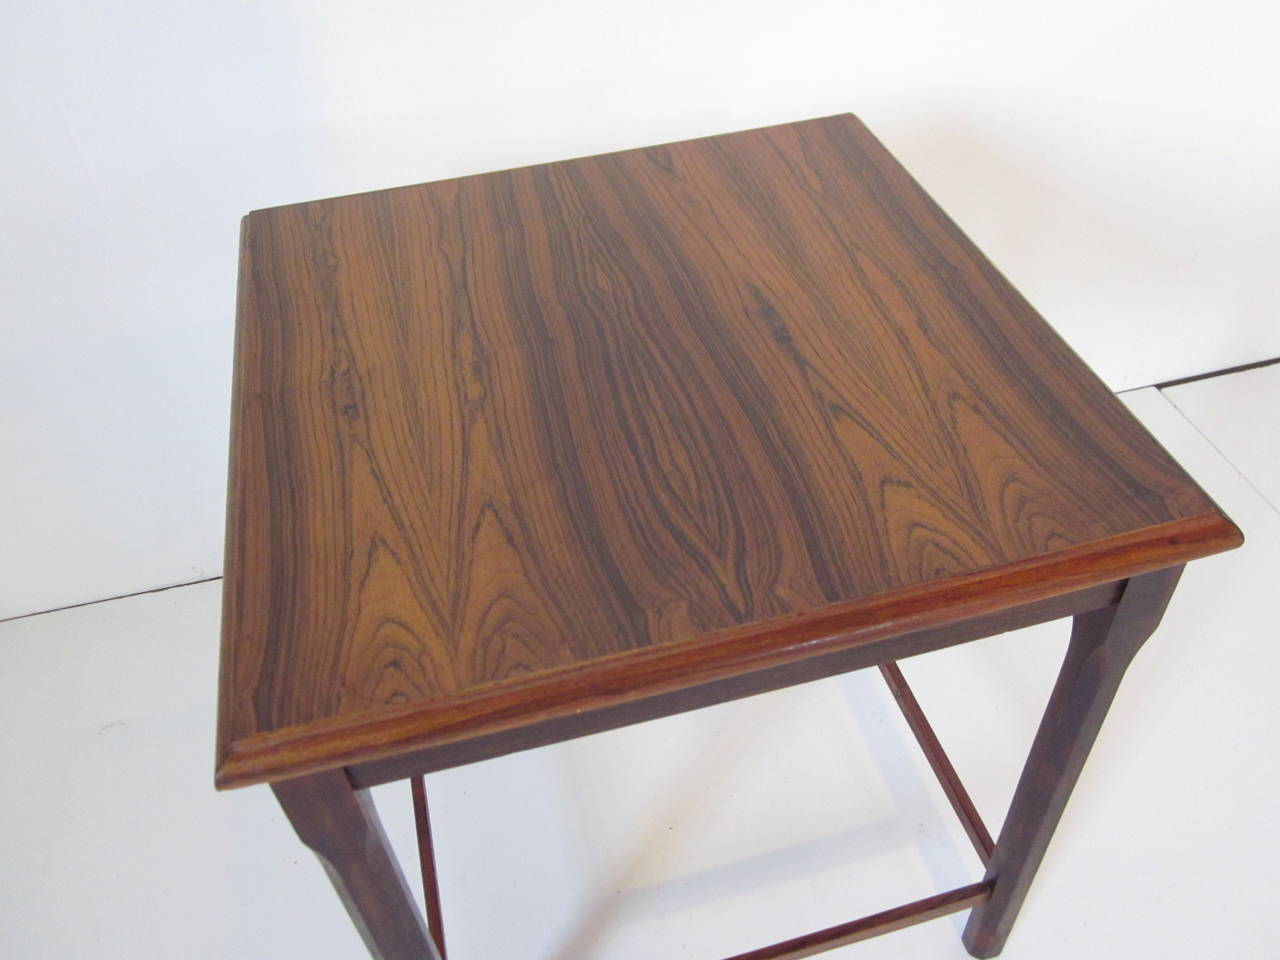 A dark Brazilian Danish rosewood side table with beveled edge construction and lower stretches marked made in Denmark.